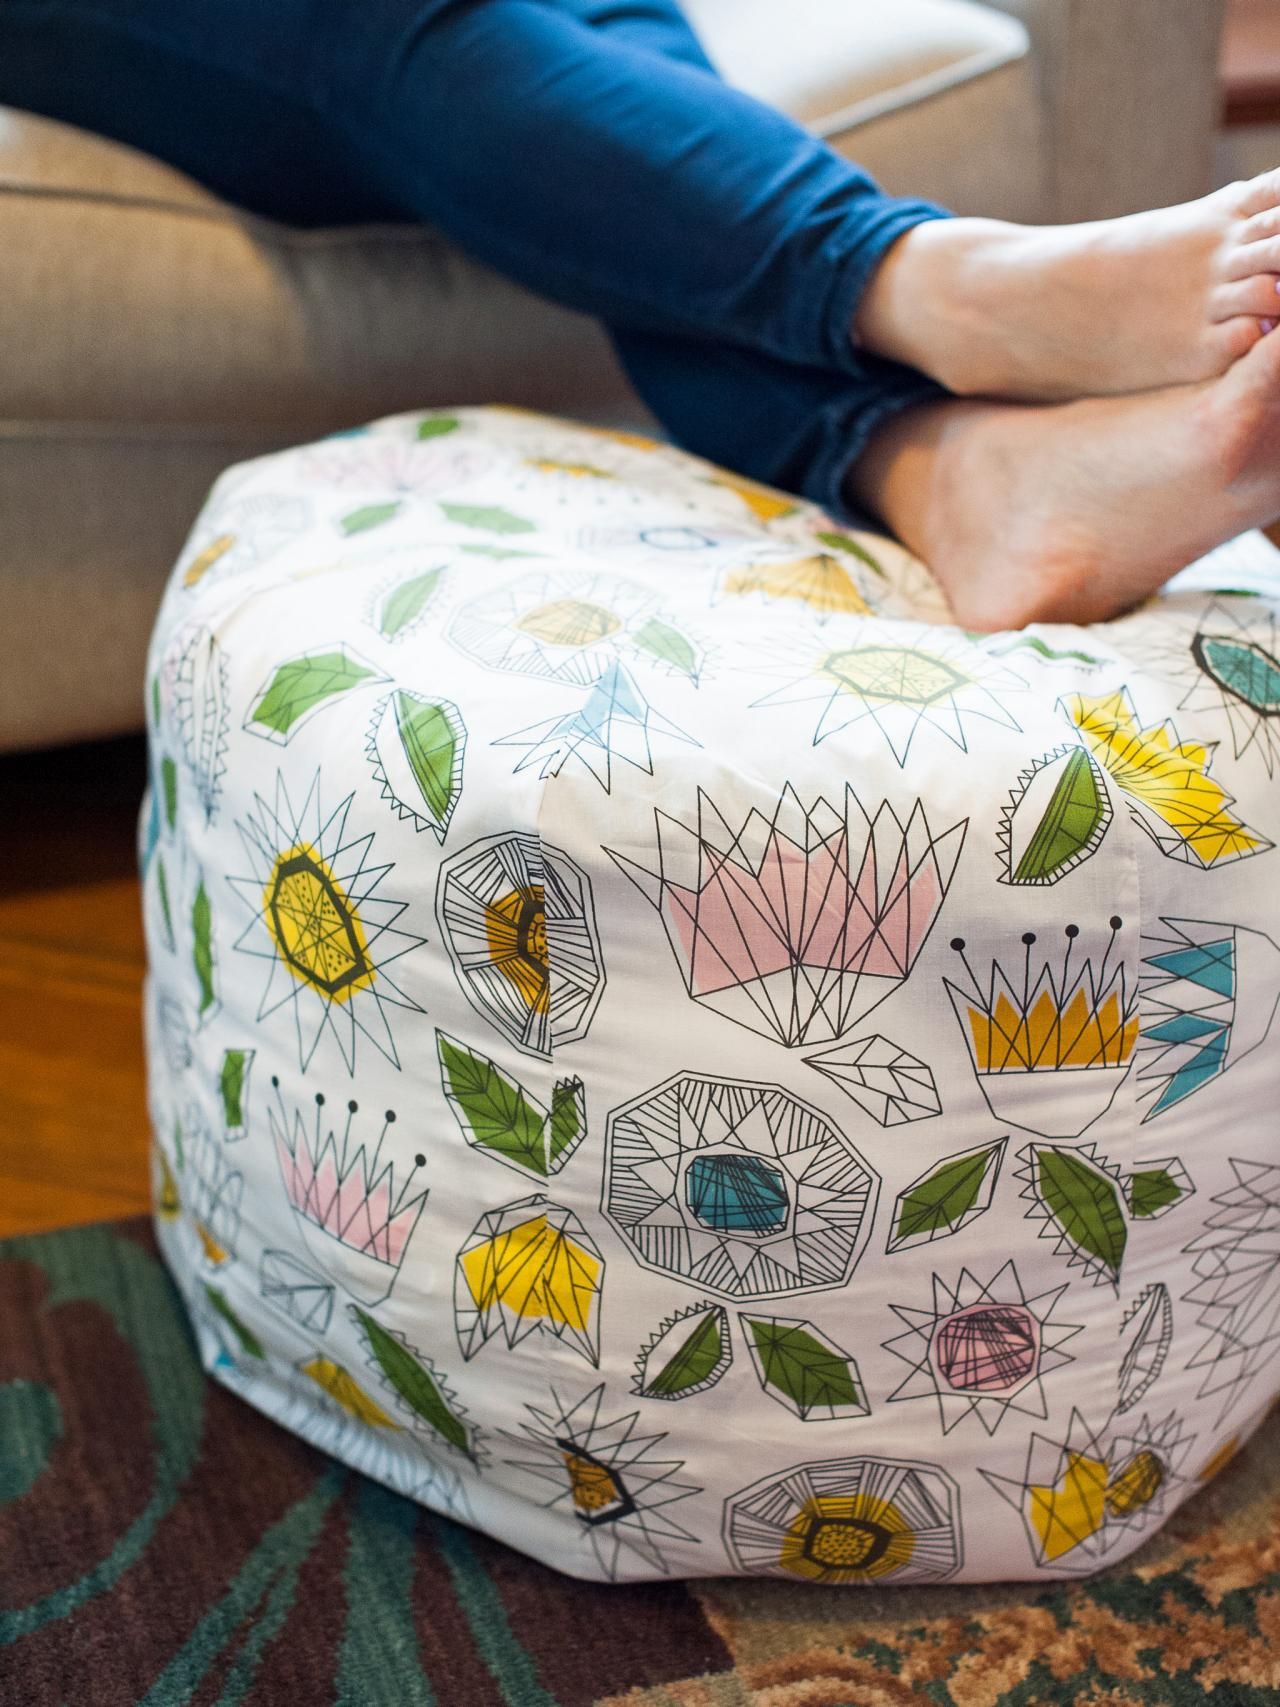 How To Make A Fabric Pouf Ottoman | Hgtv For Fabric Upholstered Ottomans (View 6 of 15)